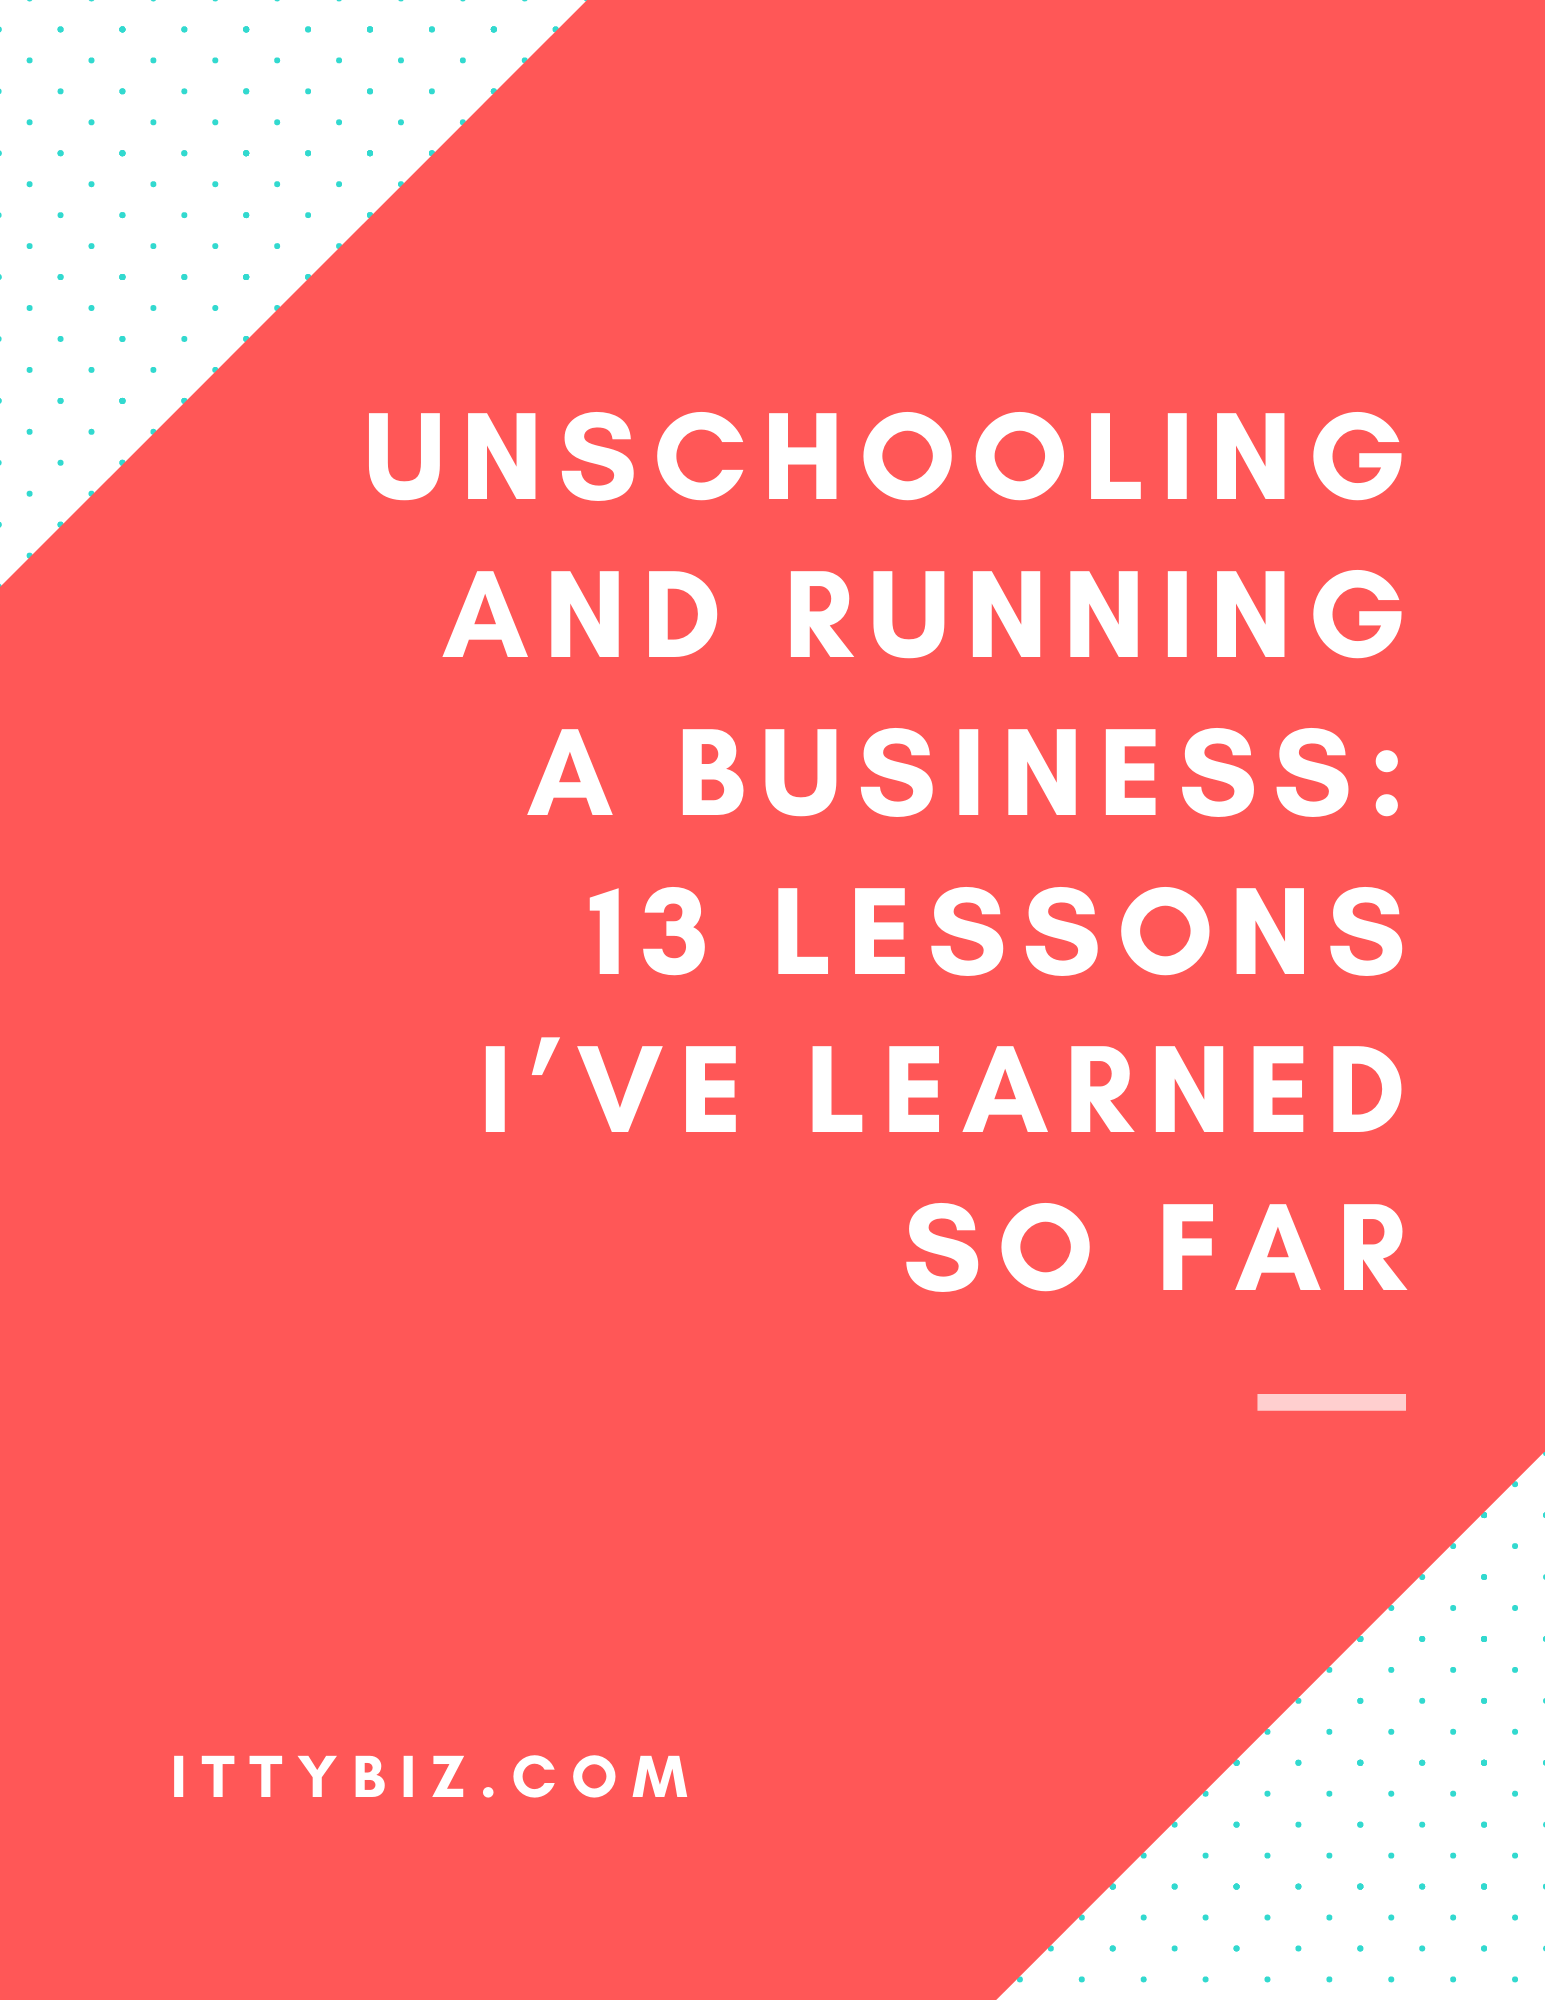 Unschooling and Running A Business: 13 Lessons I've Learned So Far